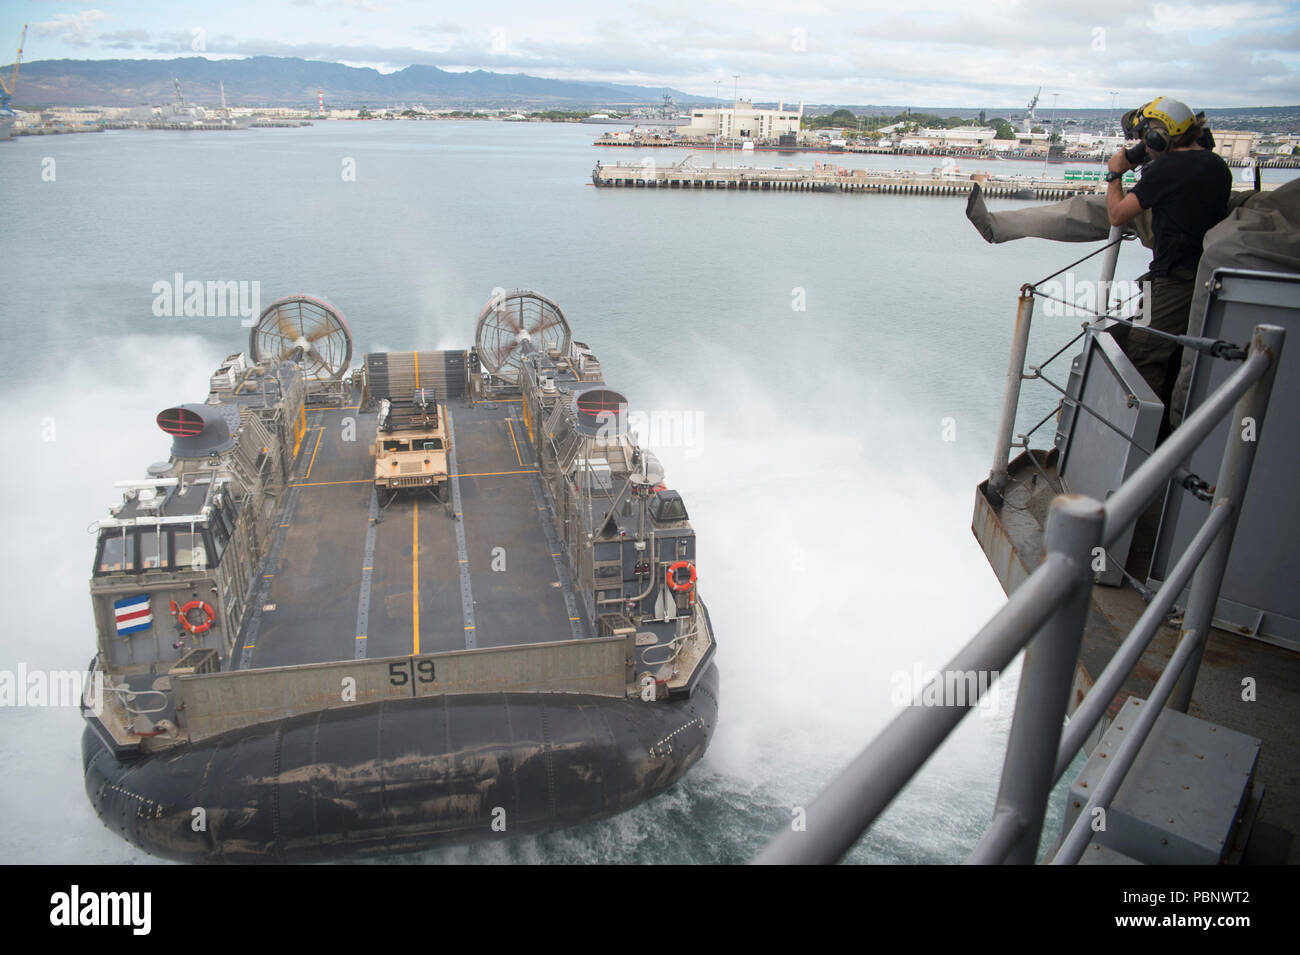 180726-N-XK809-1011 PEARL HARBOR, Hawaii (July 26, 2018) Landing craft air cushion (LCAC) 59, assigned to Assault Craft Unit (ACU) 5, departs the well deck of the amphibious assault ship USS Bonhomme Richard (LHD 6). Bonhomme Richard is currently underway in the U.S. 3rd Fleet area of operations. (U.S. Navy photo by Mass Communication Specialist 2nd Class William Sykes) Stock Photo